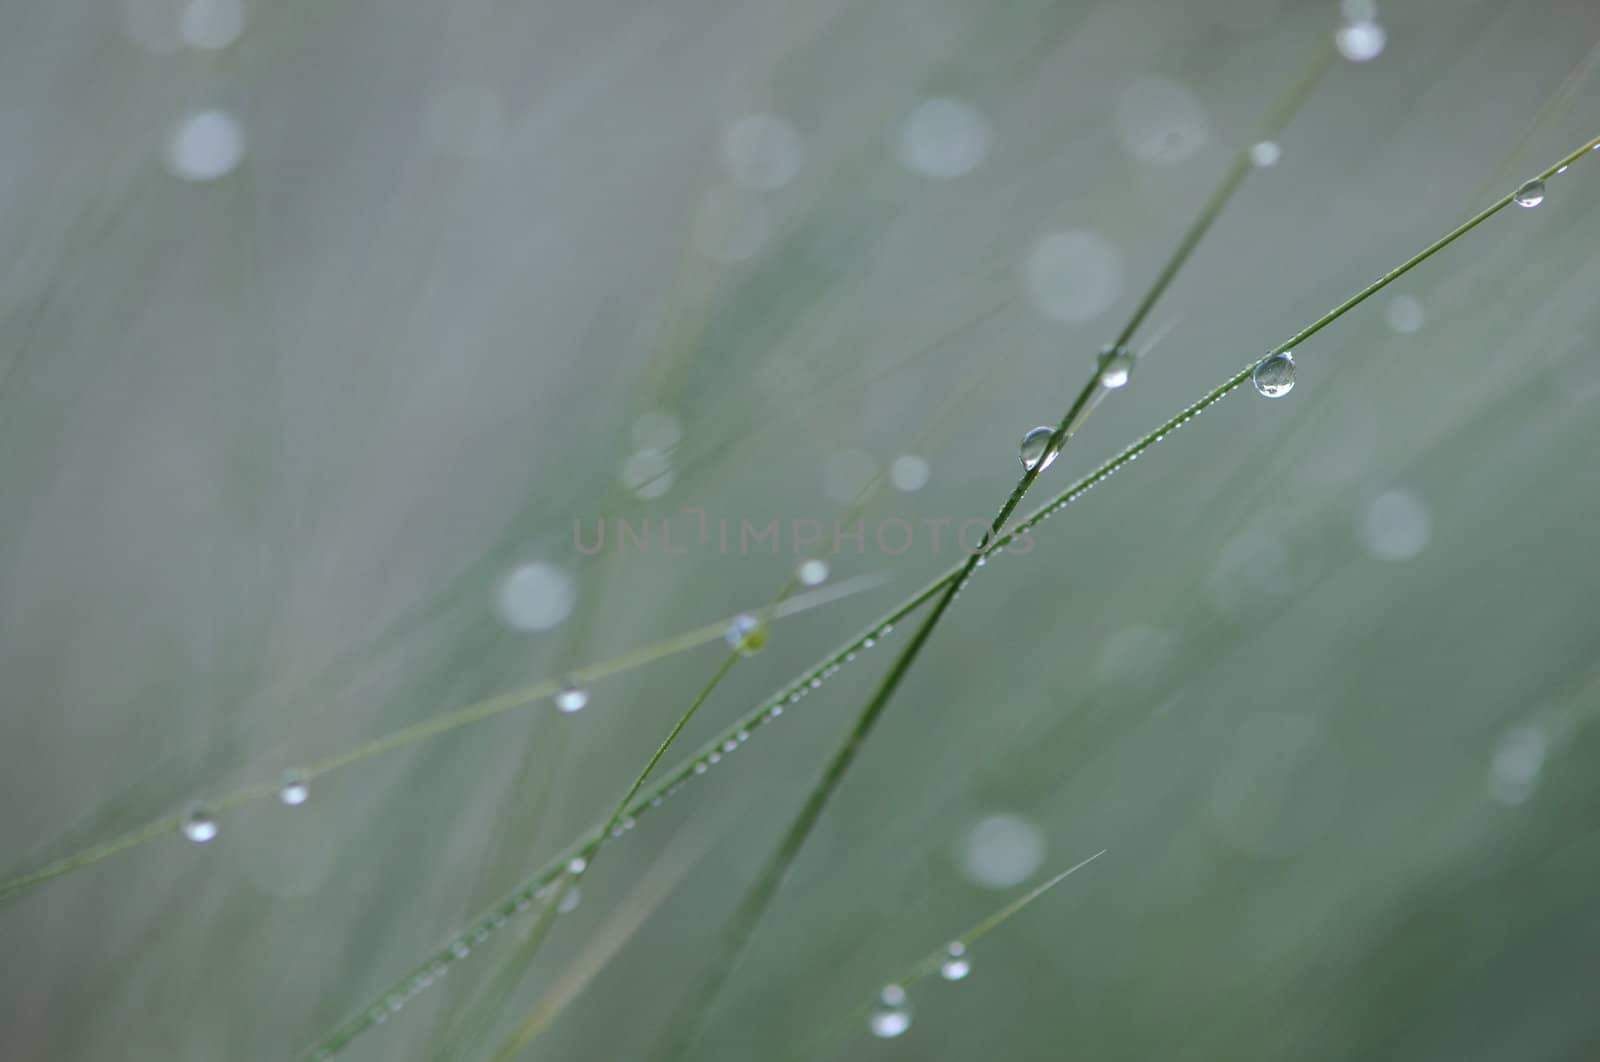 Many Water Drops on Grass with a Blurred Background